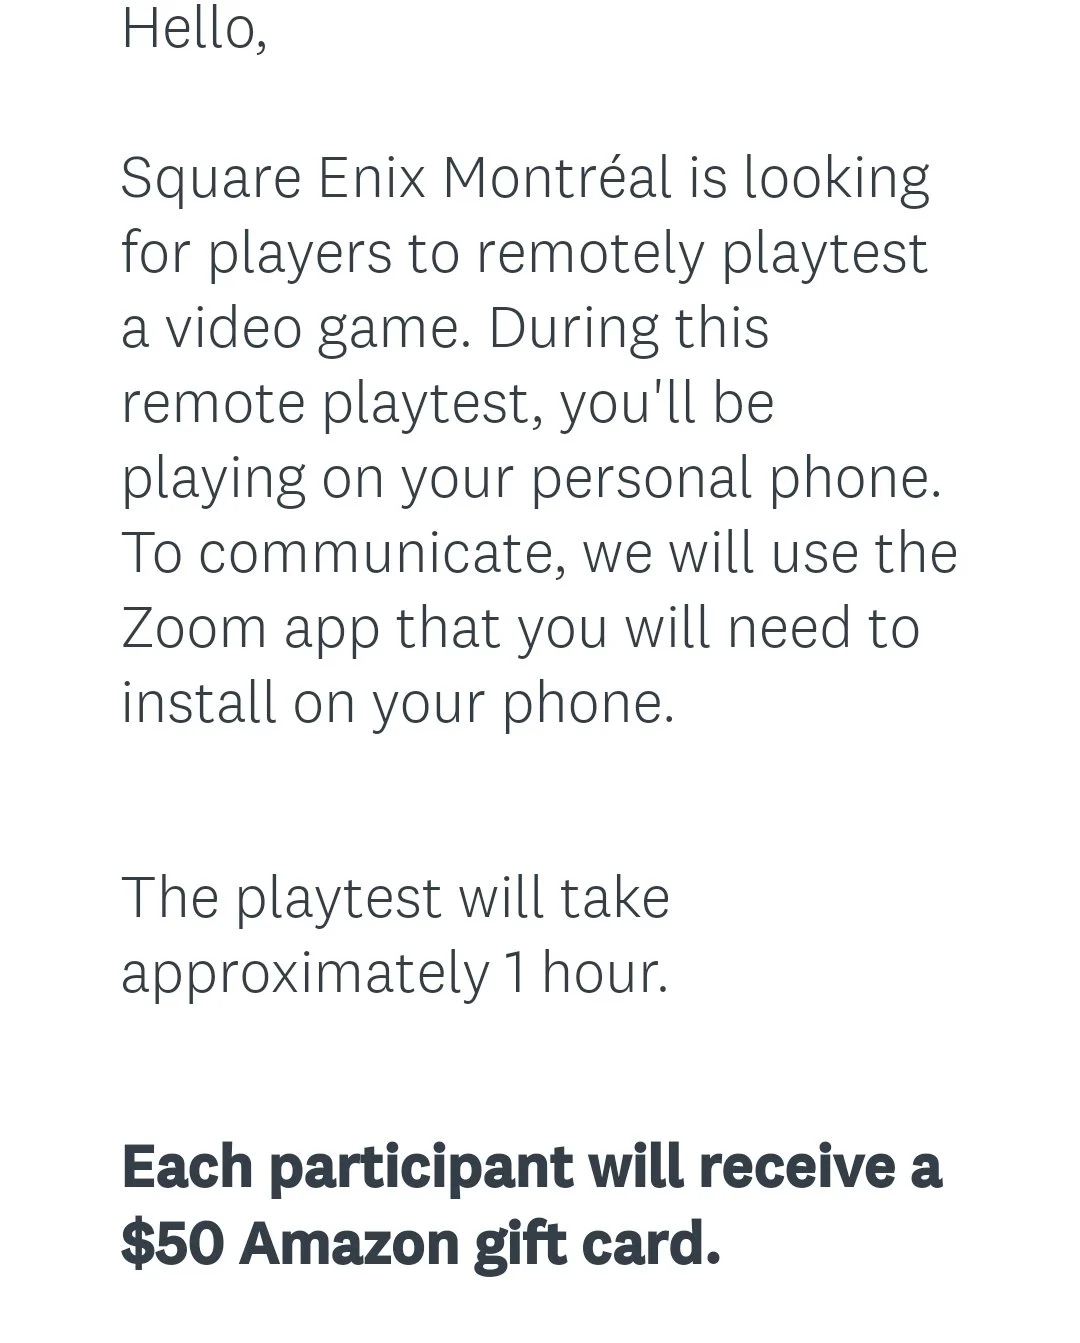 Square Enix Montreal's Invitation to Players